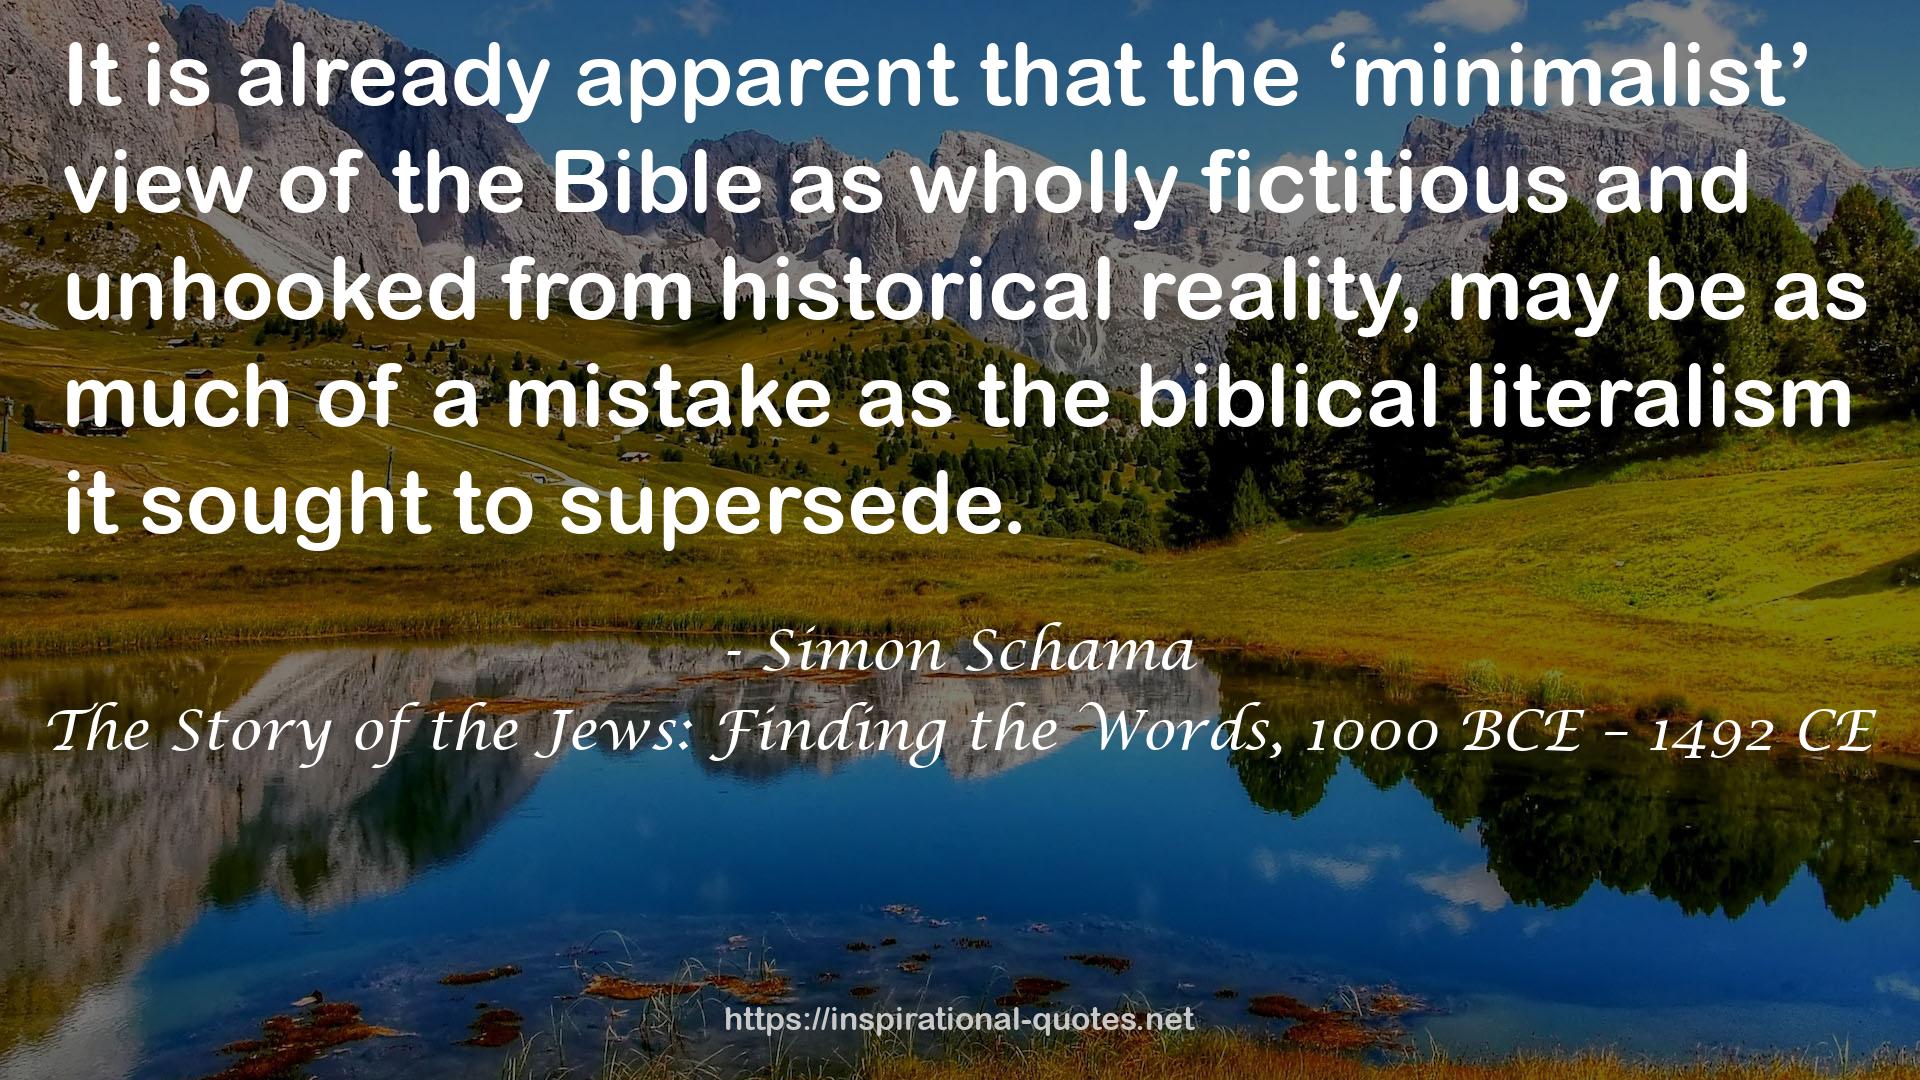 The Story of the Jews: Finding the Words, 1000 BCE – 1492 CE QUOTES